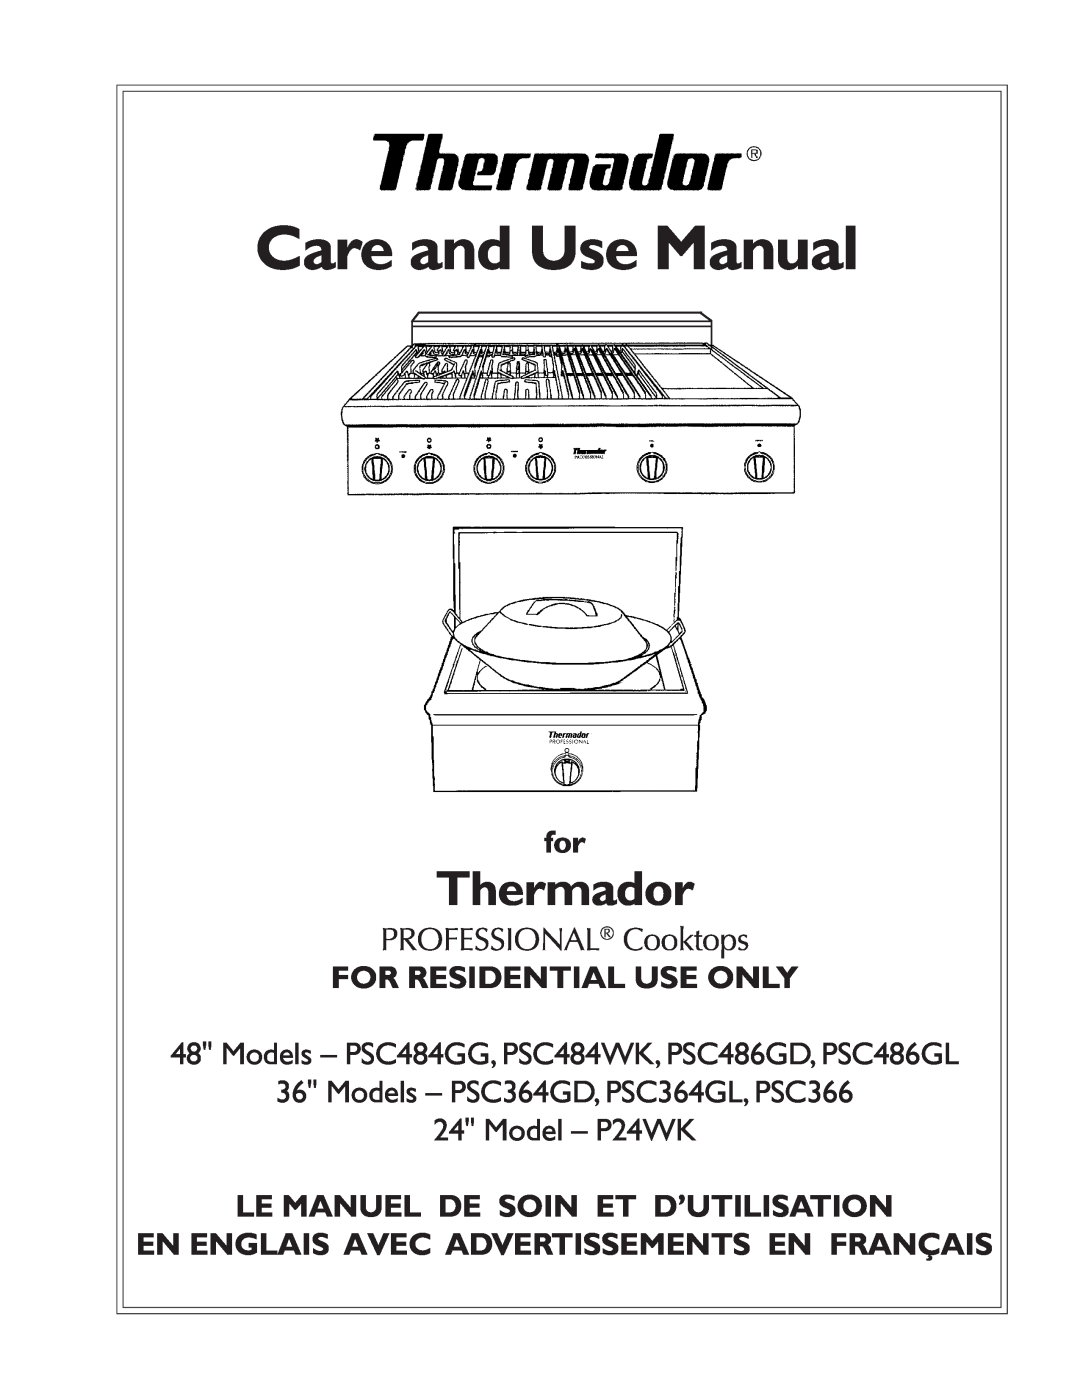 Range Kleen PSC486GL manual For Residential Use Only, Le Manuel De Soin Et D’Utilisation, Care and Use Manual, Thermador 